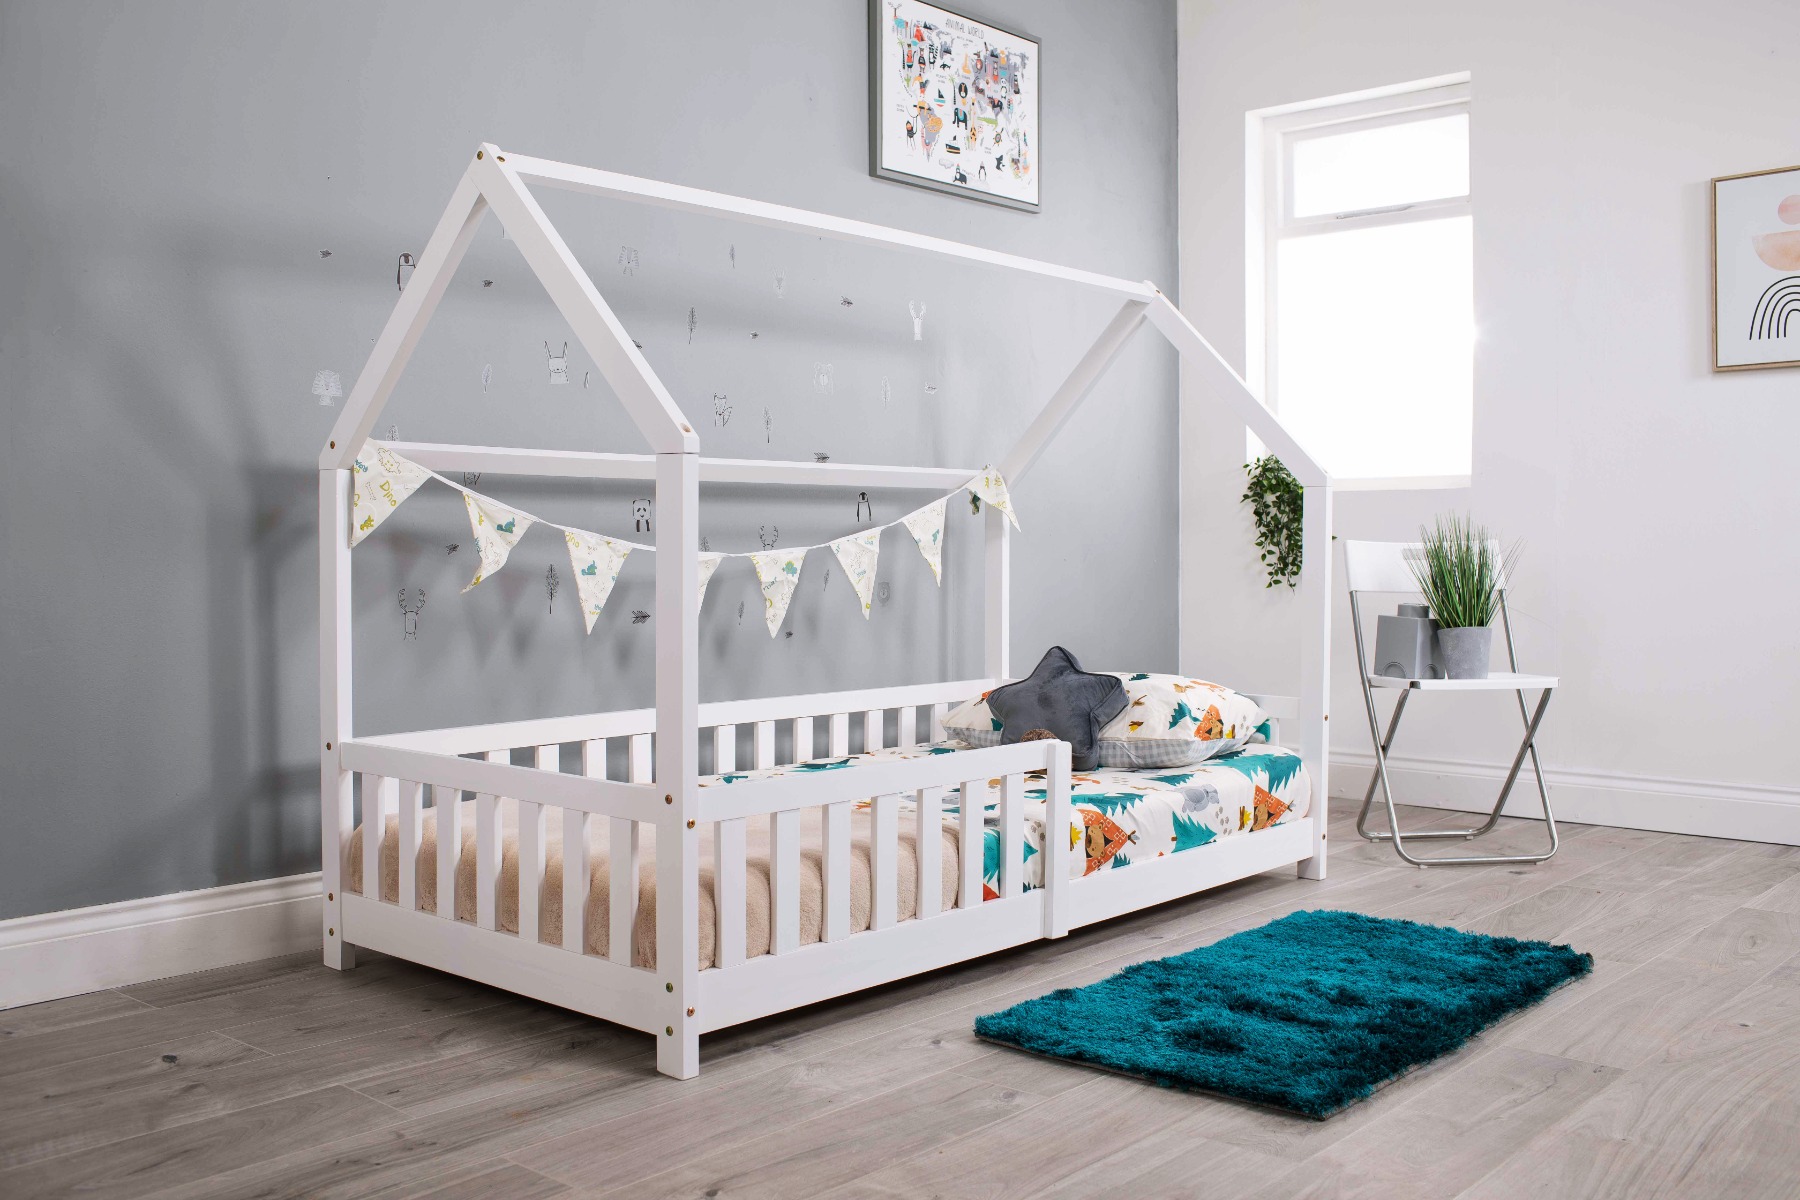 Flair White Wooden Explorer Playhouse Bed With Rails